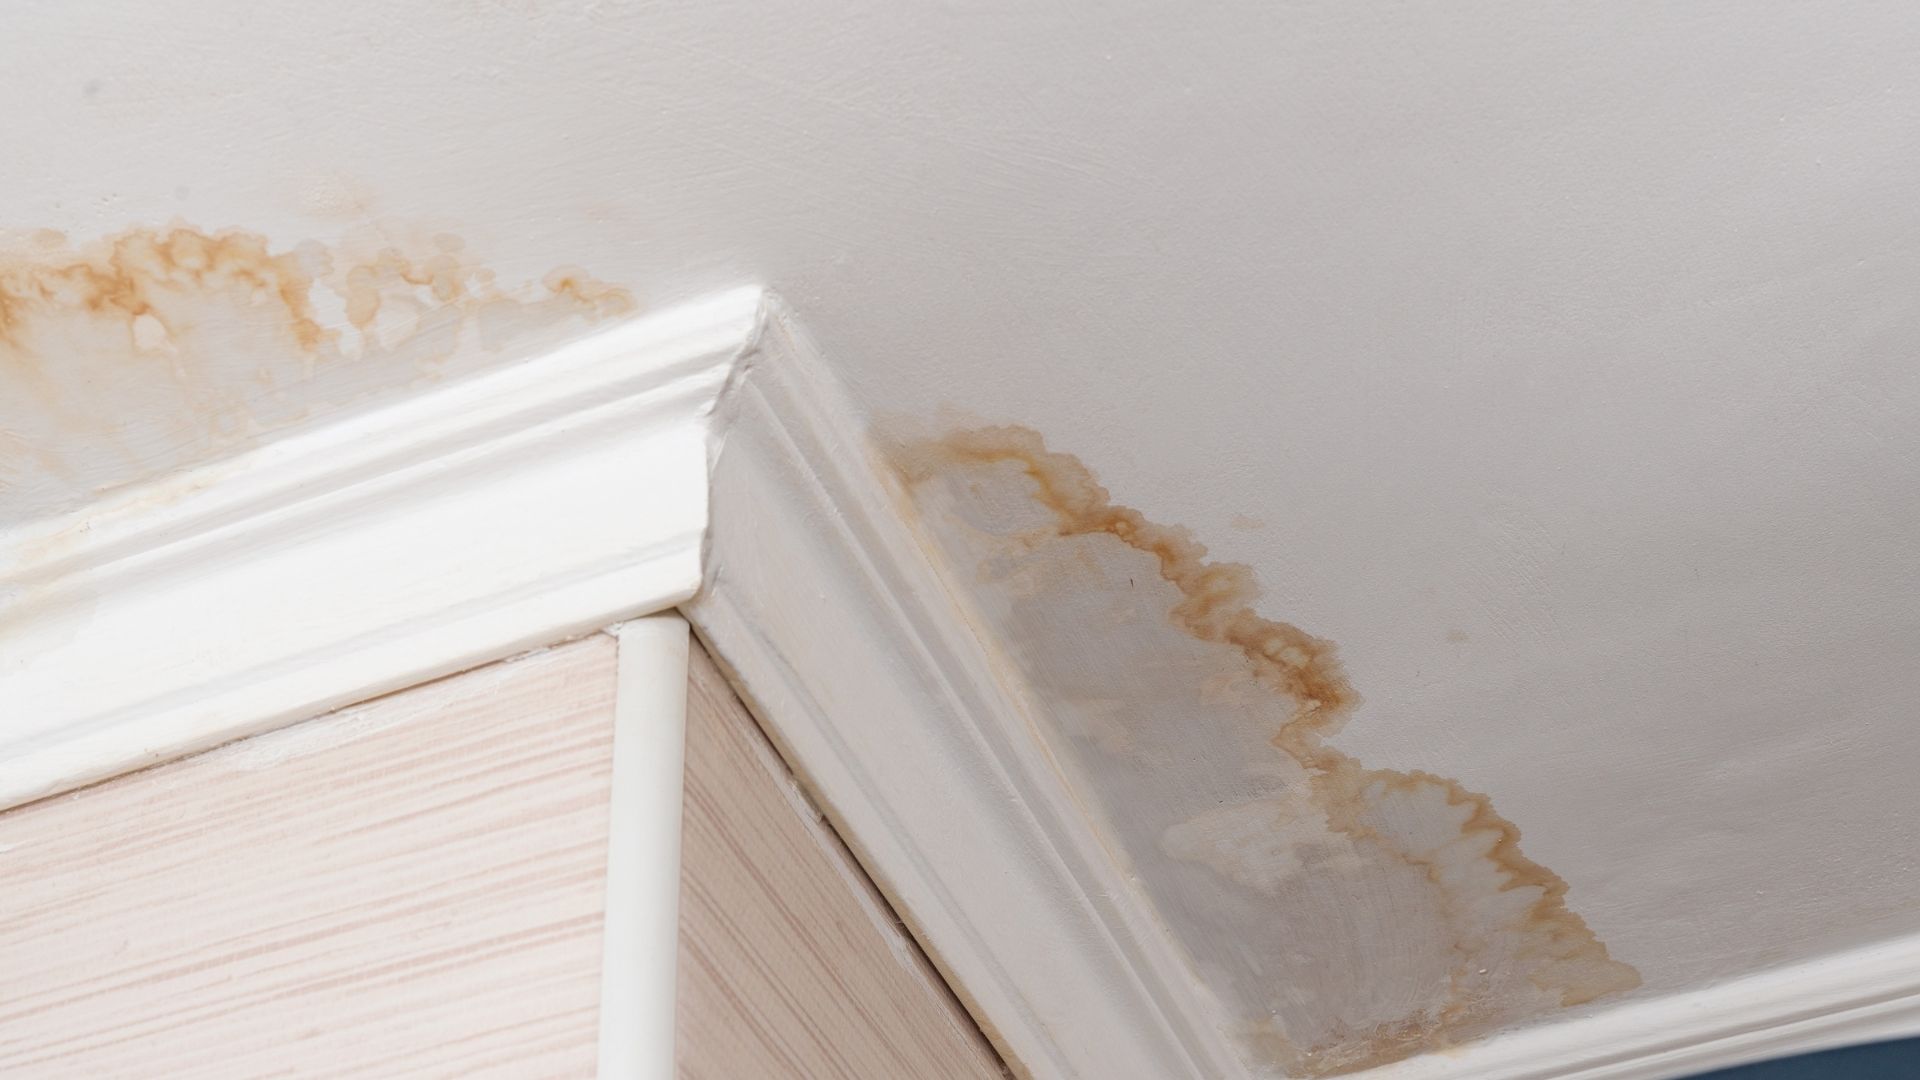 Prevent water damage with leak detection. Learn the key steps for water damage prevention with Major League Plumbing.